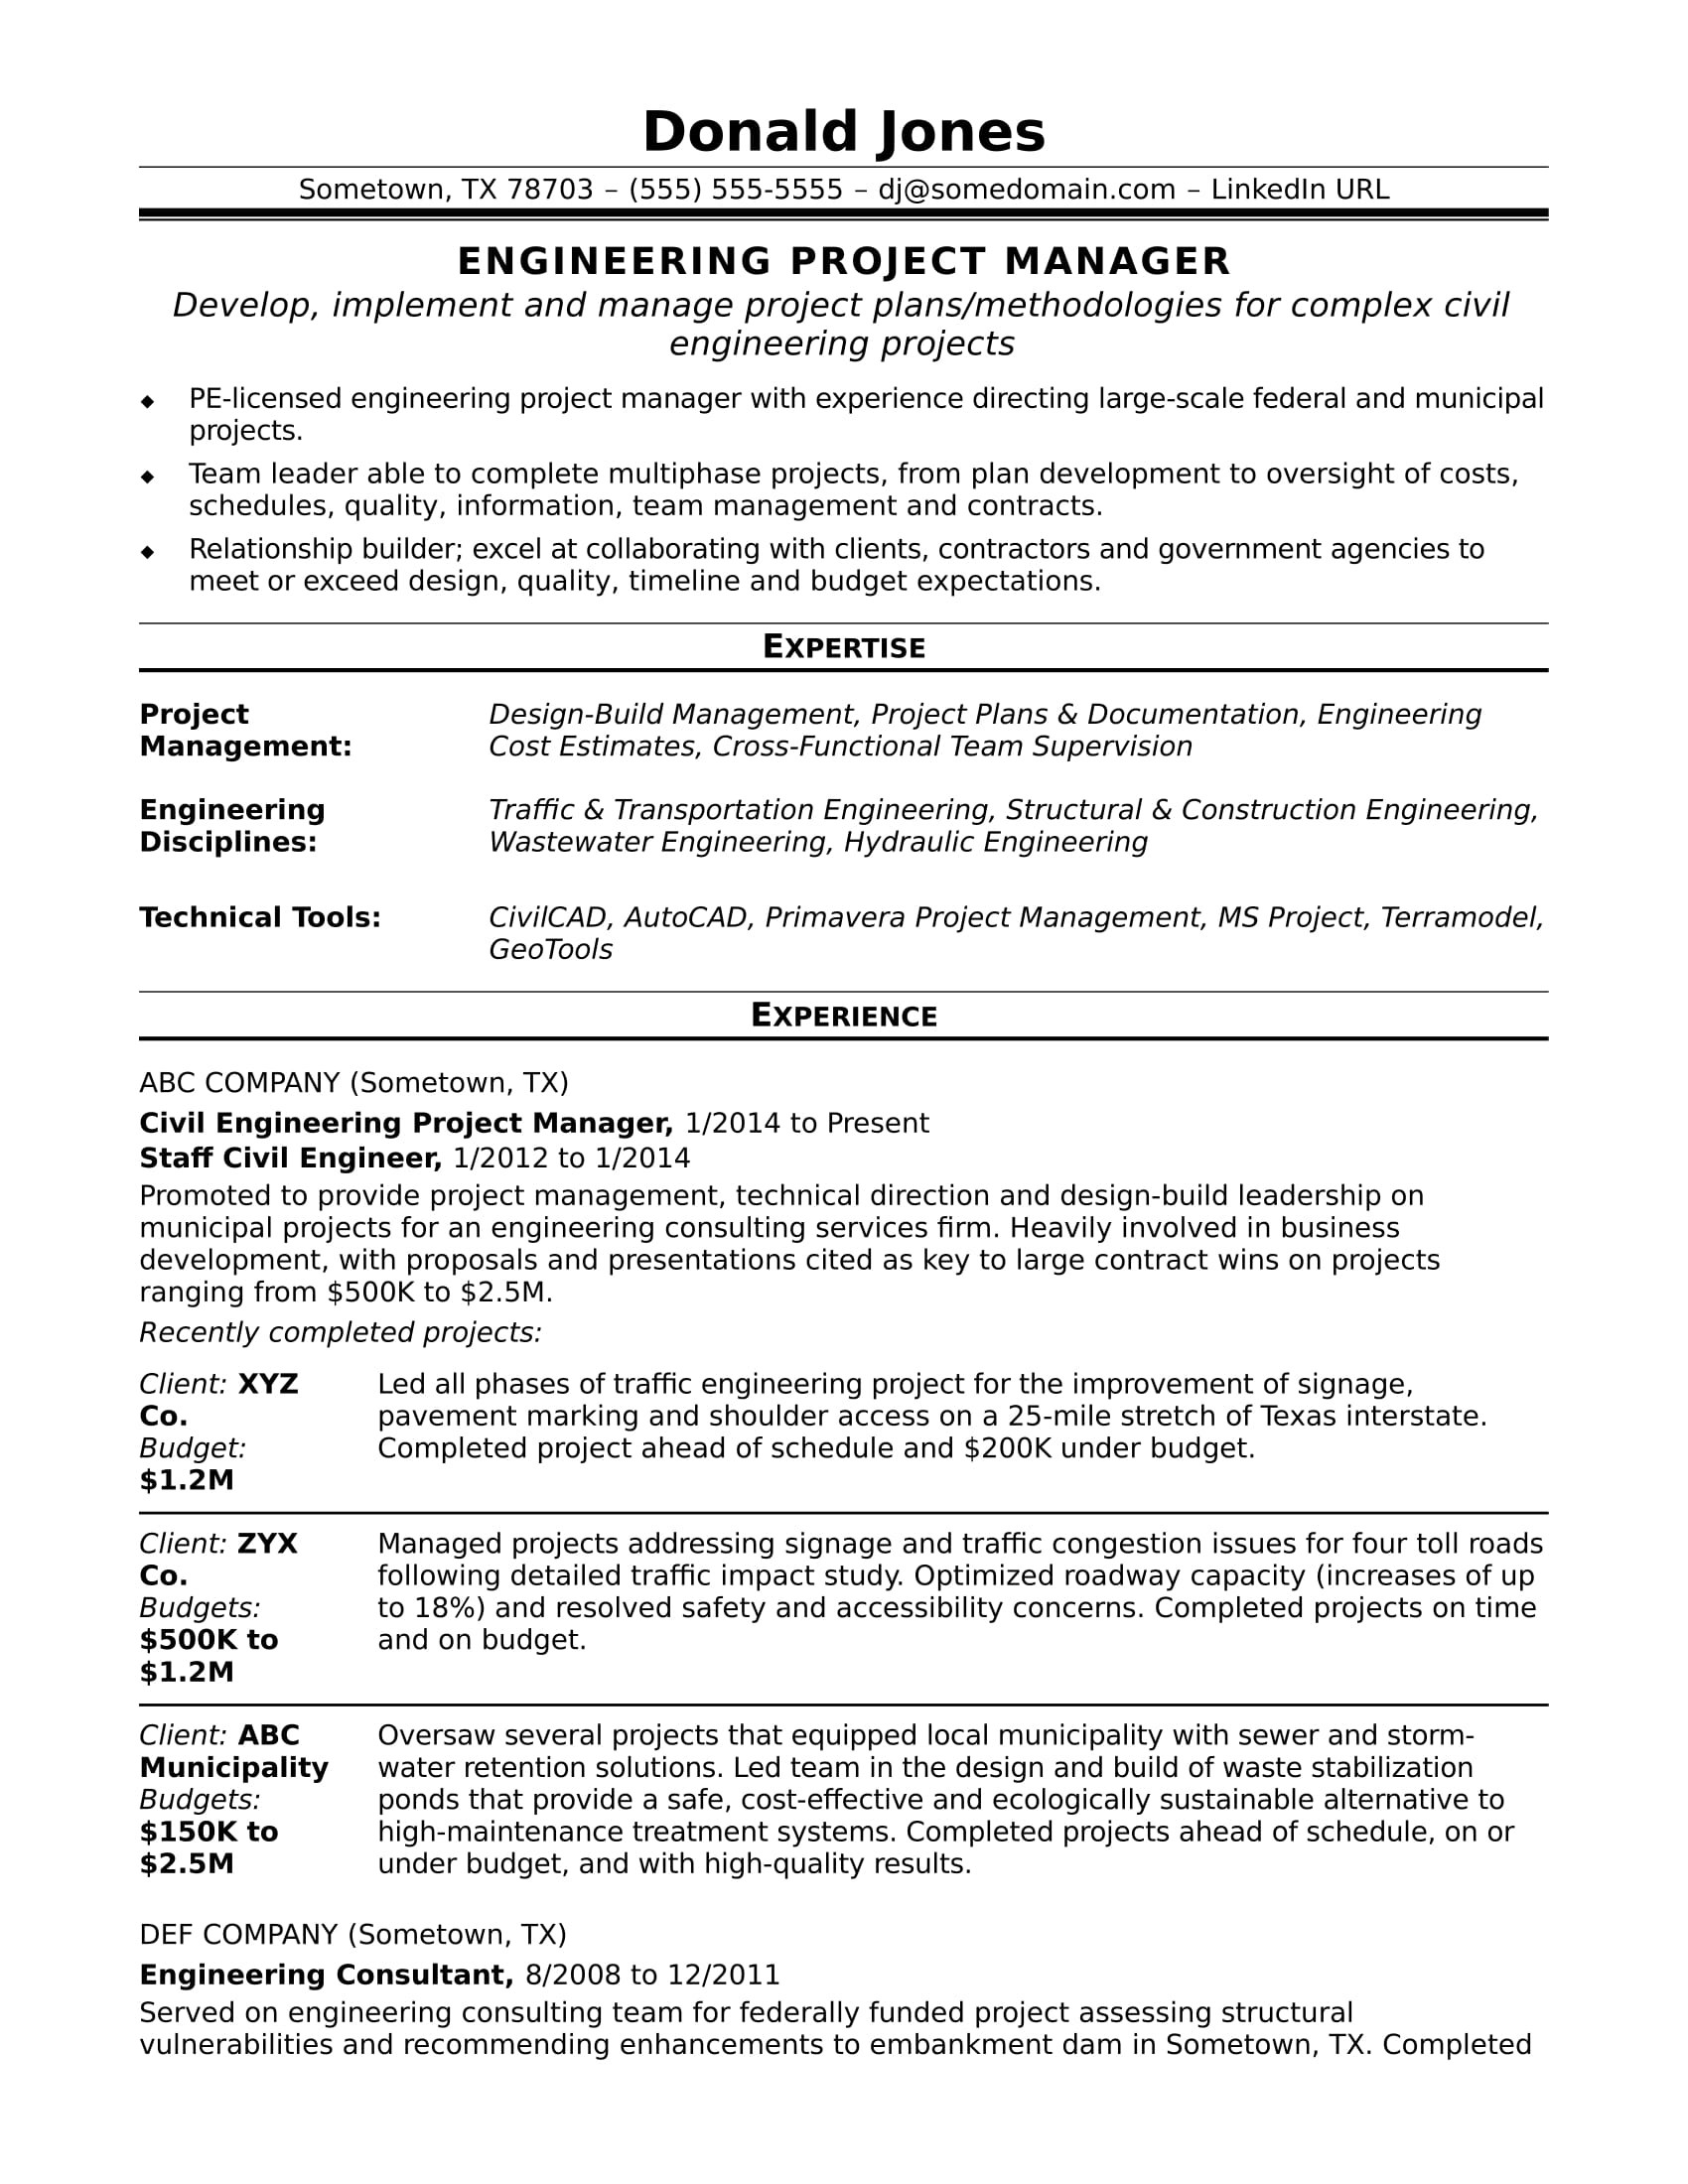 Sample Resume for a Midlevel Engineering Project Manager